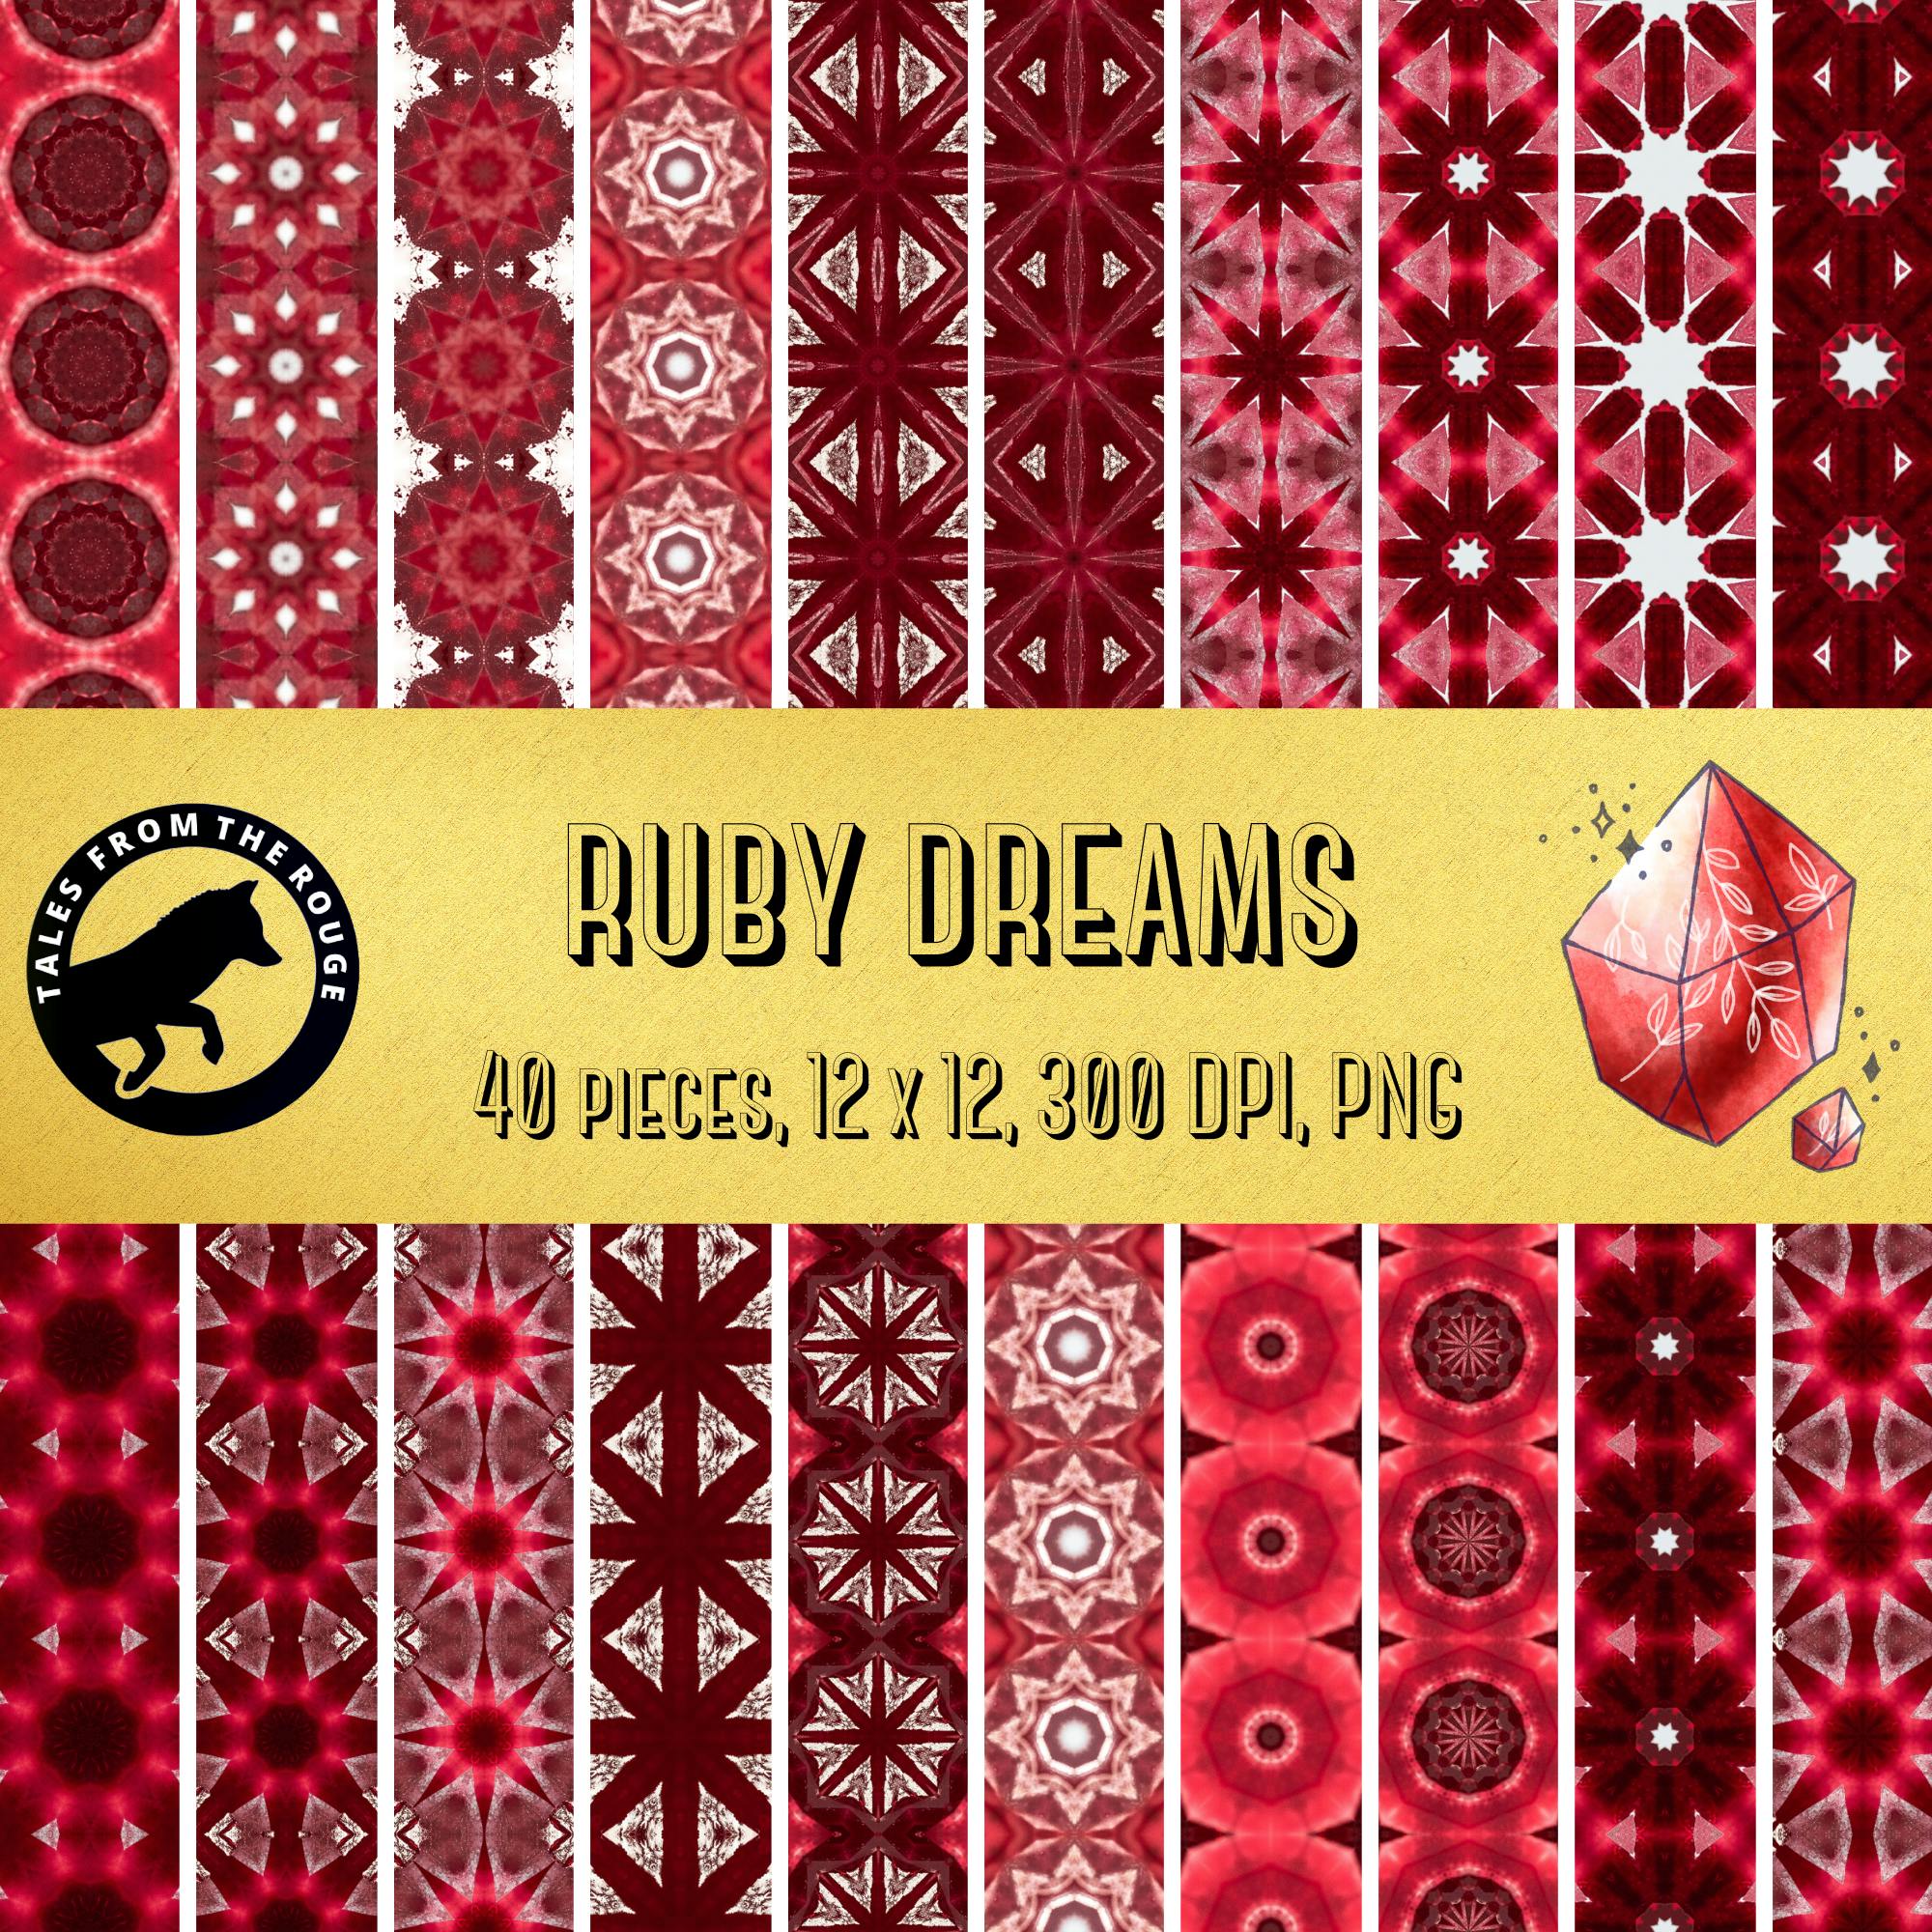 Ruby Dreams 40 Piece Paper Pack (Commercial Usage)